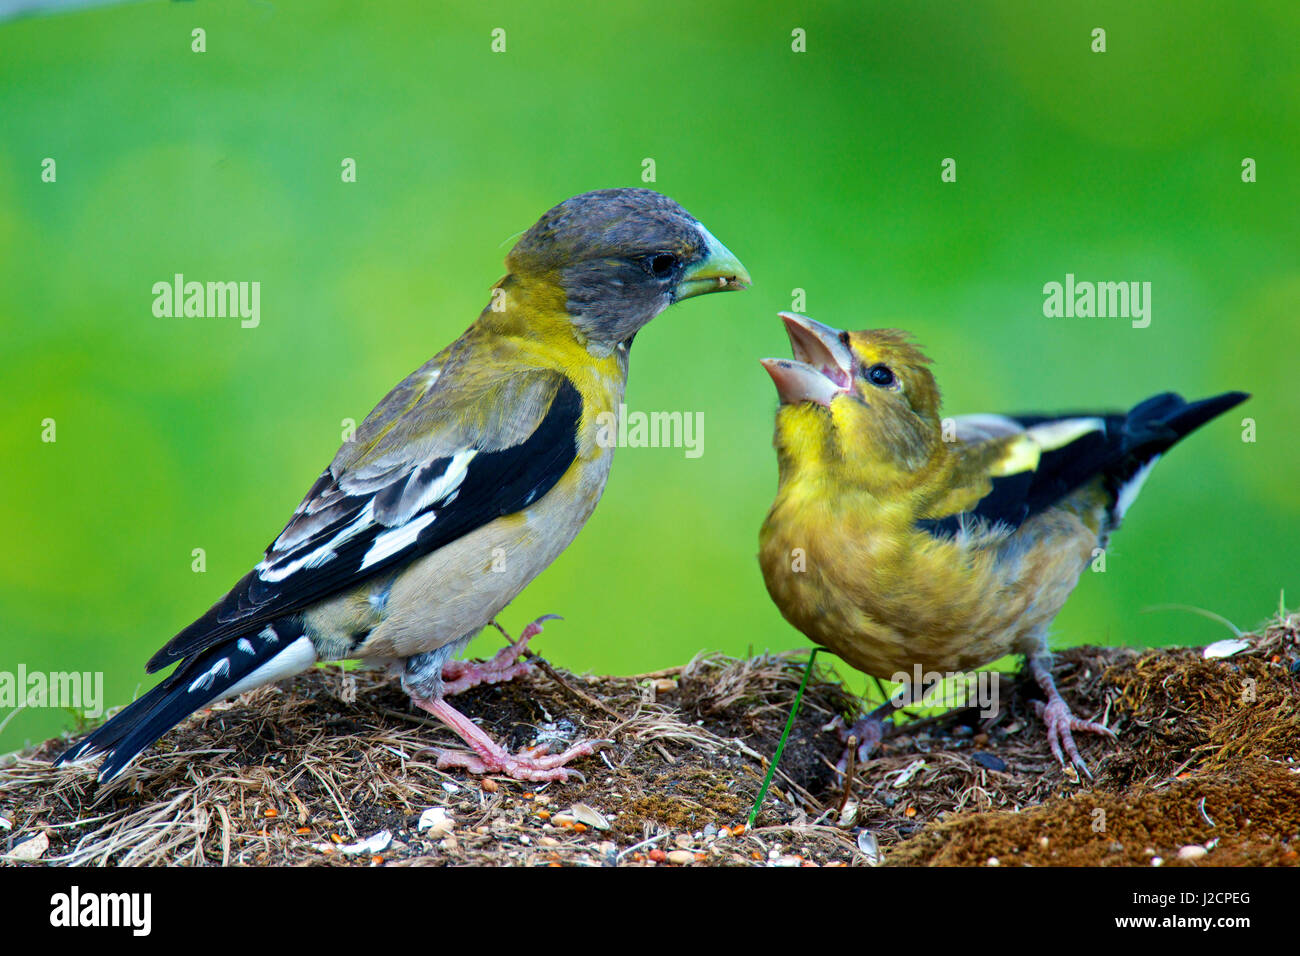 The evening grosbeak (Hesperiphona vespertina) is a passerine bird in the finch family Fringillidae. The breeding habitat is coniferous and mixed forest in Canada and the western mountainous areas of the United States. Young being fed. Stock Photo